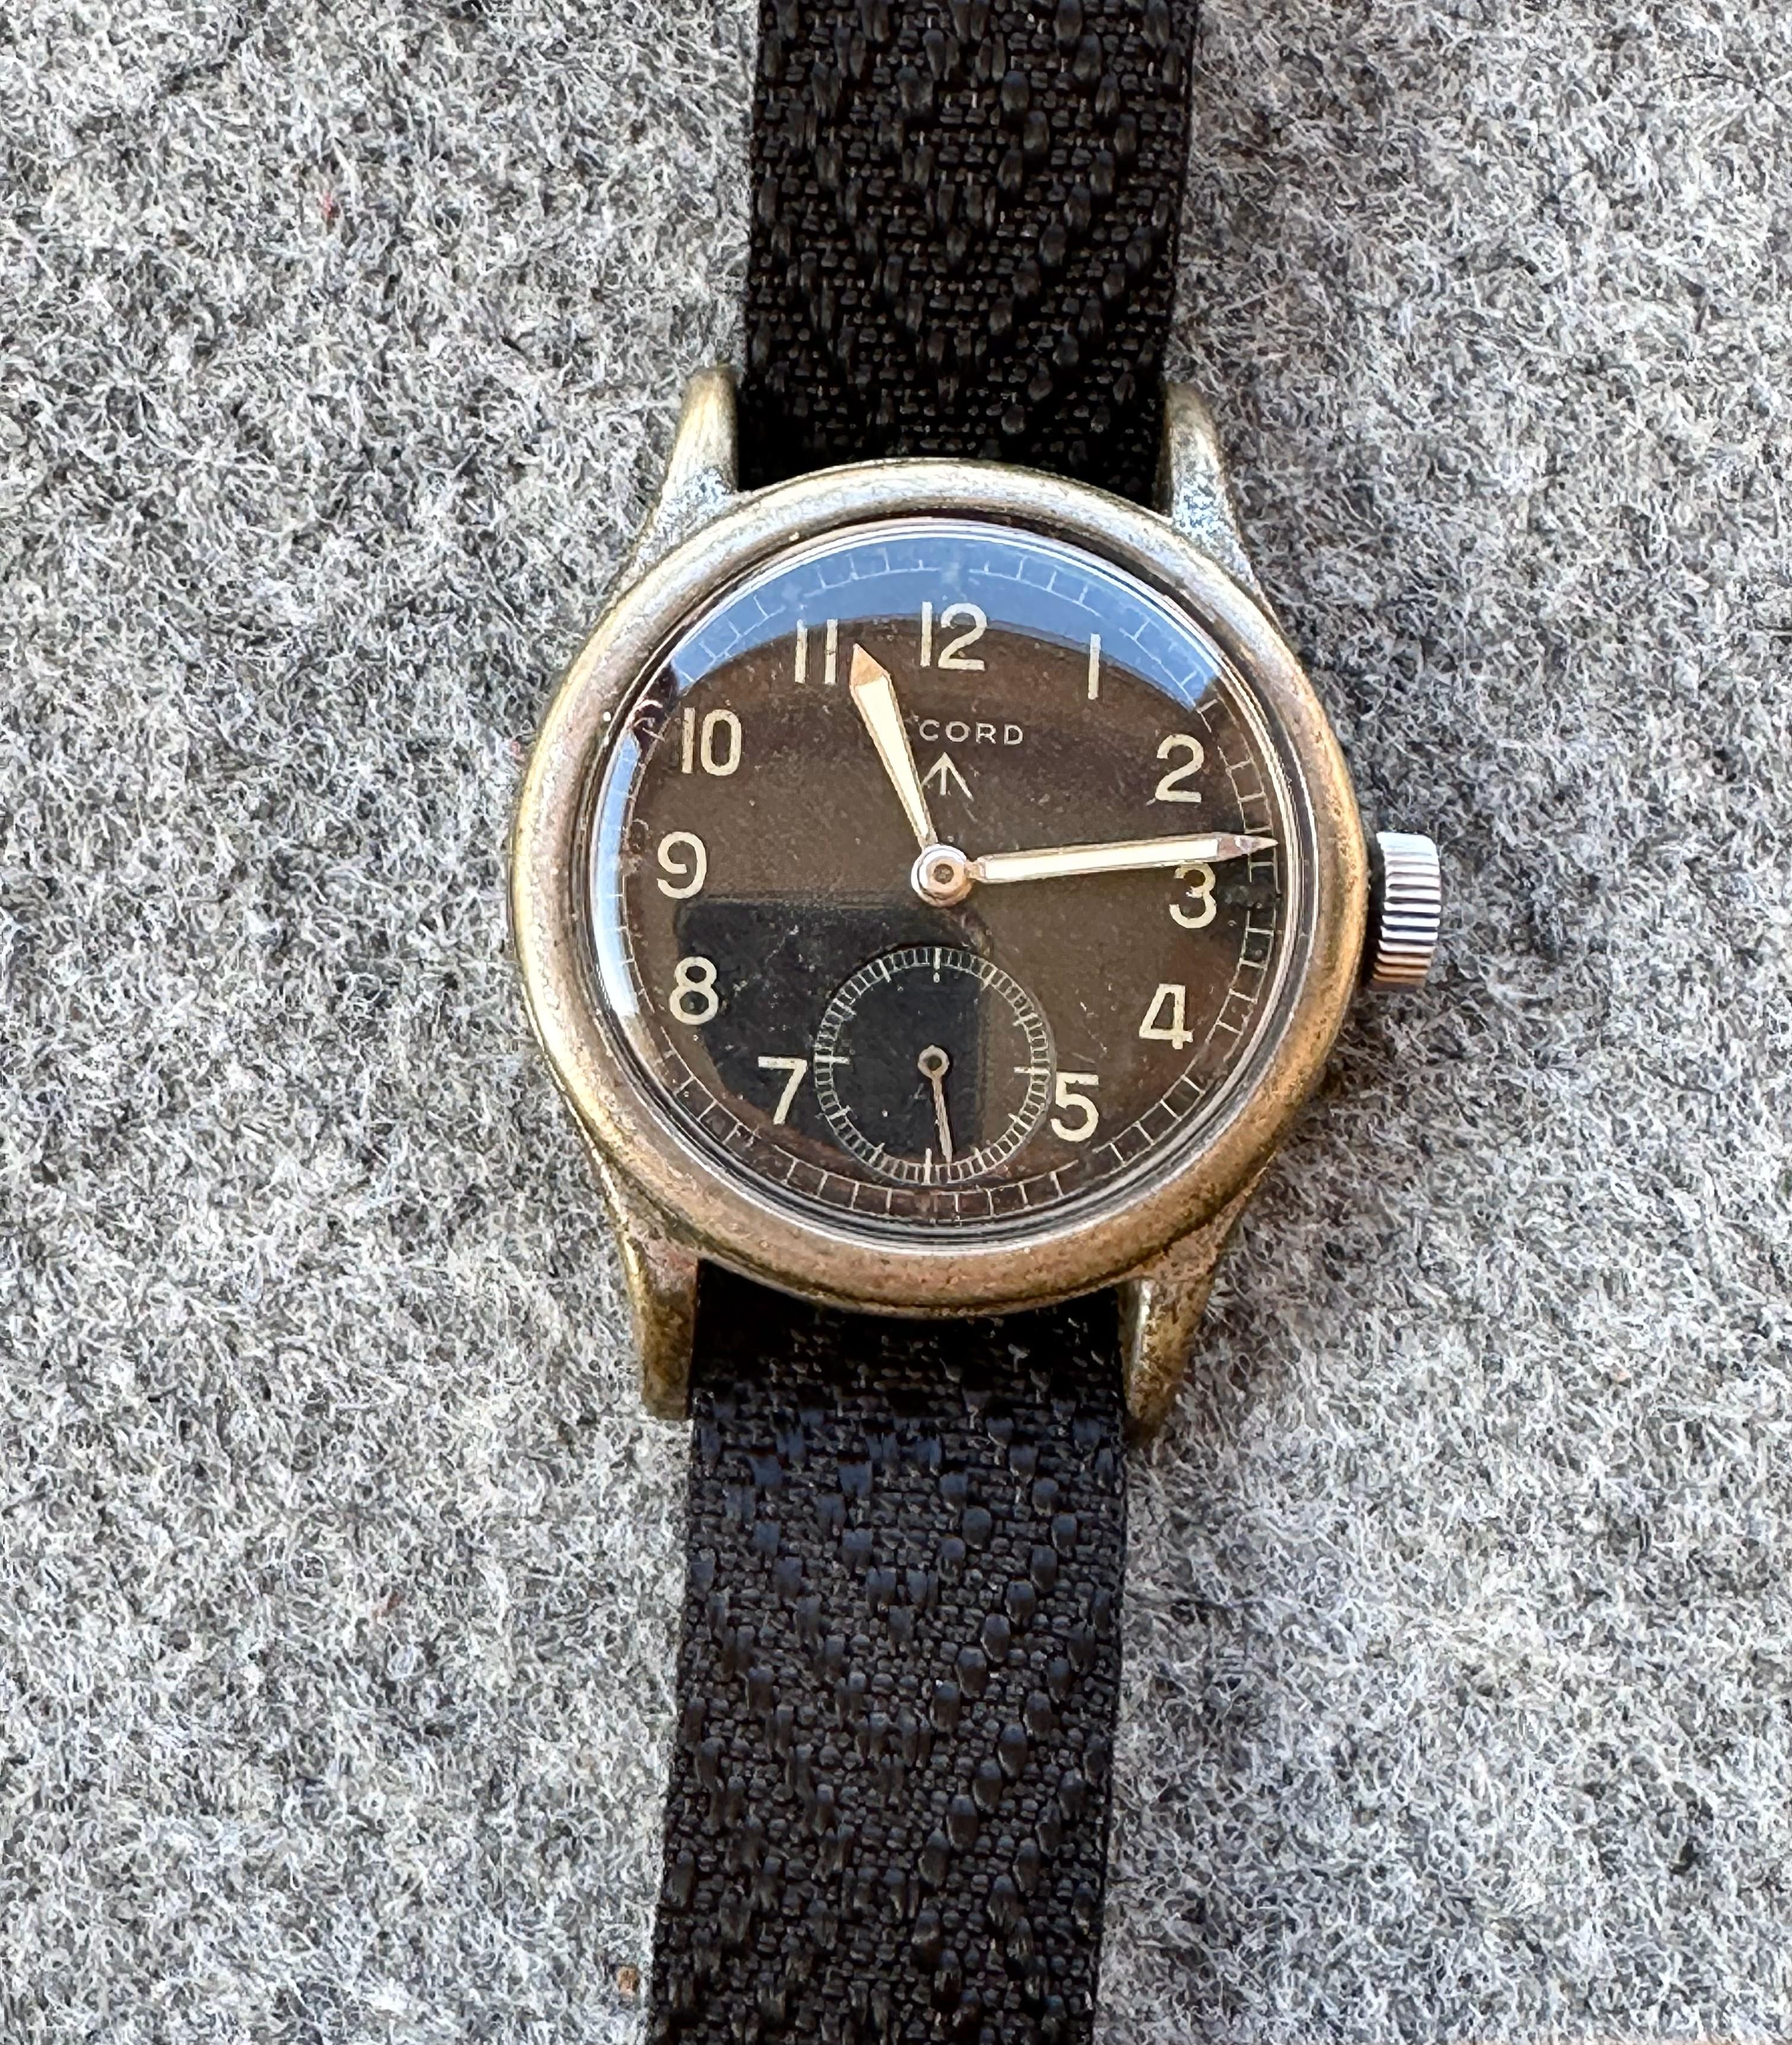 Men's Record Military Issued Dirty Dozen Watch - WWW L33573 Watch. For Sale